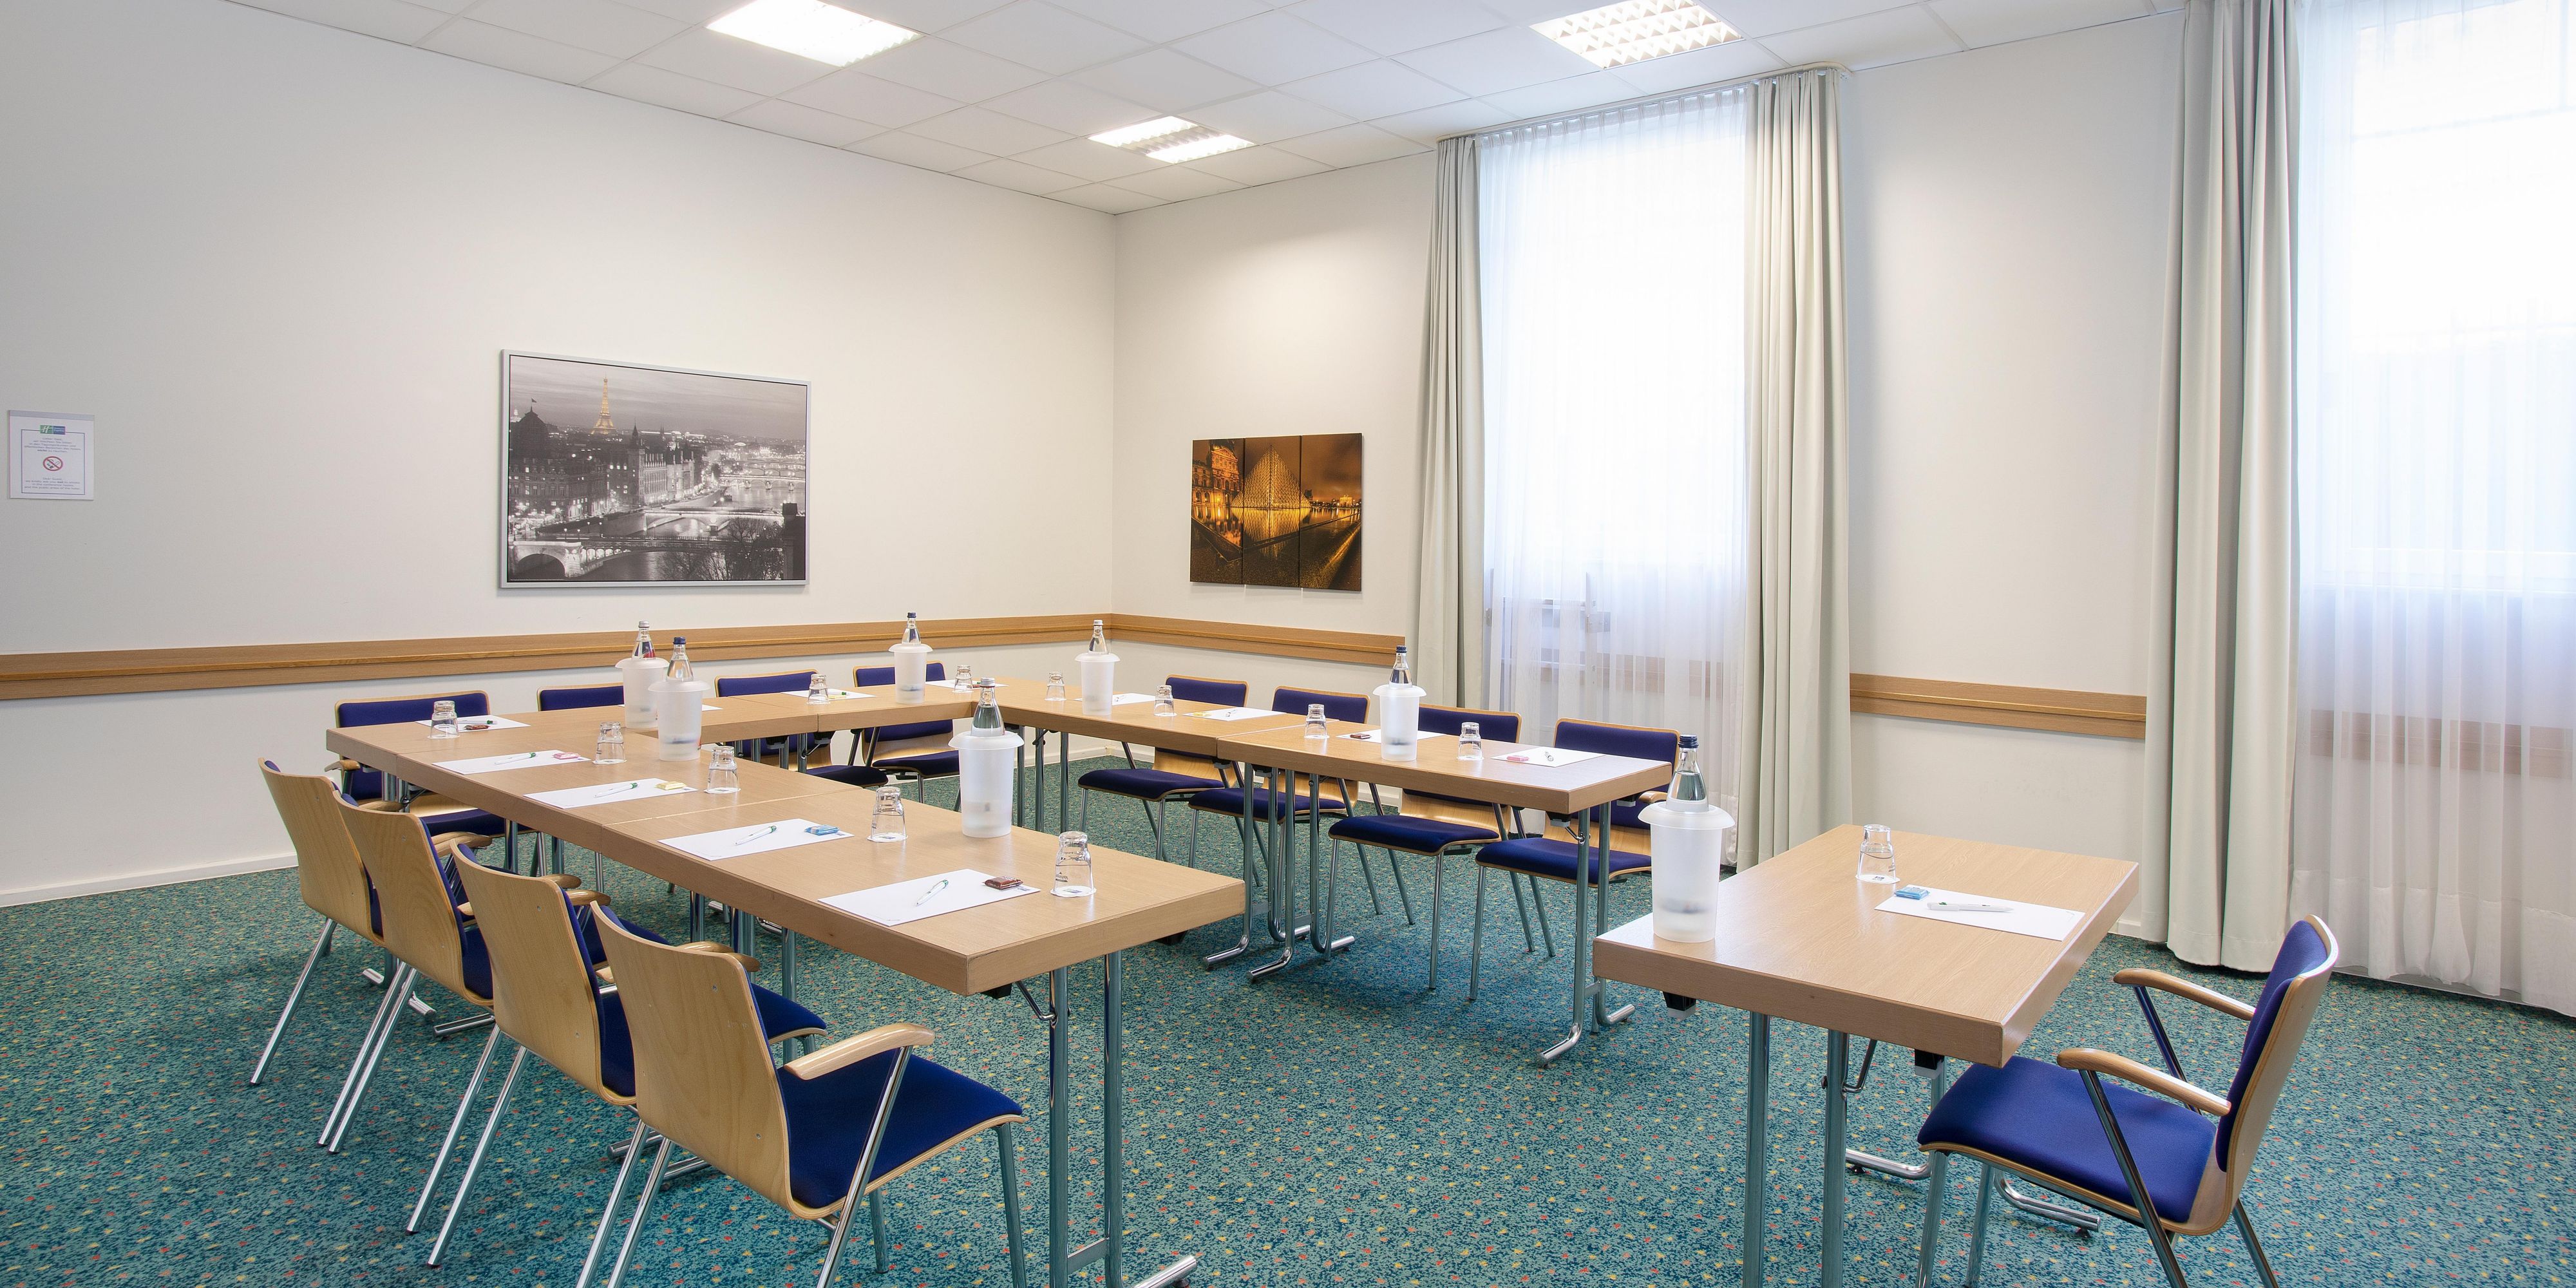 Our five well-equipped, naturally lit meeting rooms are ideal for seminars and special events near Frankfurt Airport. There’s ample space for up to 50 guests, and buffet lunches can be arranged on request. We offer inclusive Wi-Fi throughout the hotel, as well as paid on-site parking.